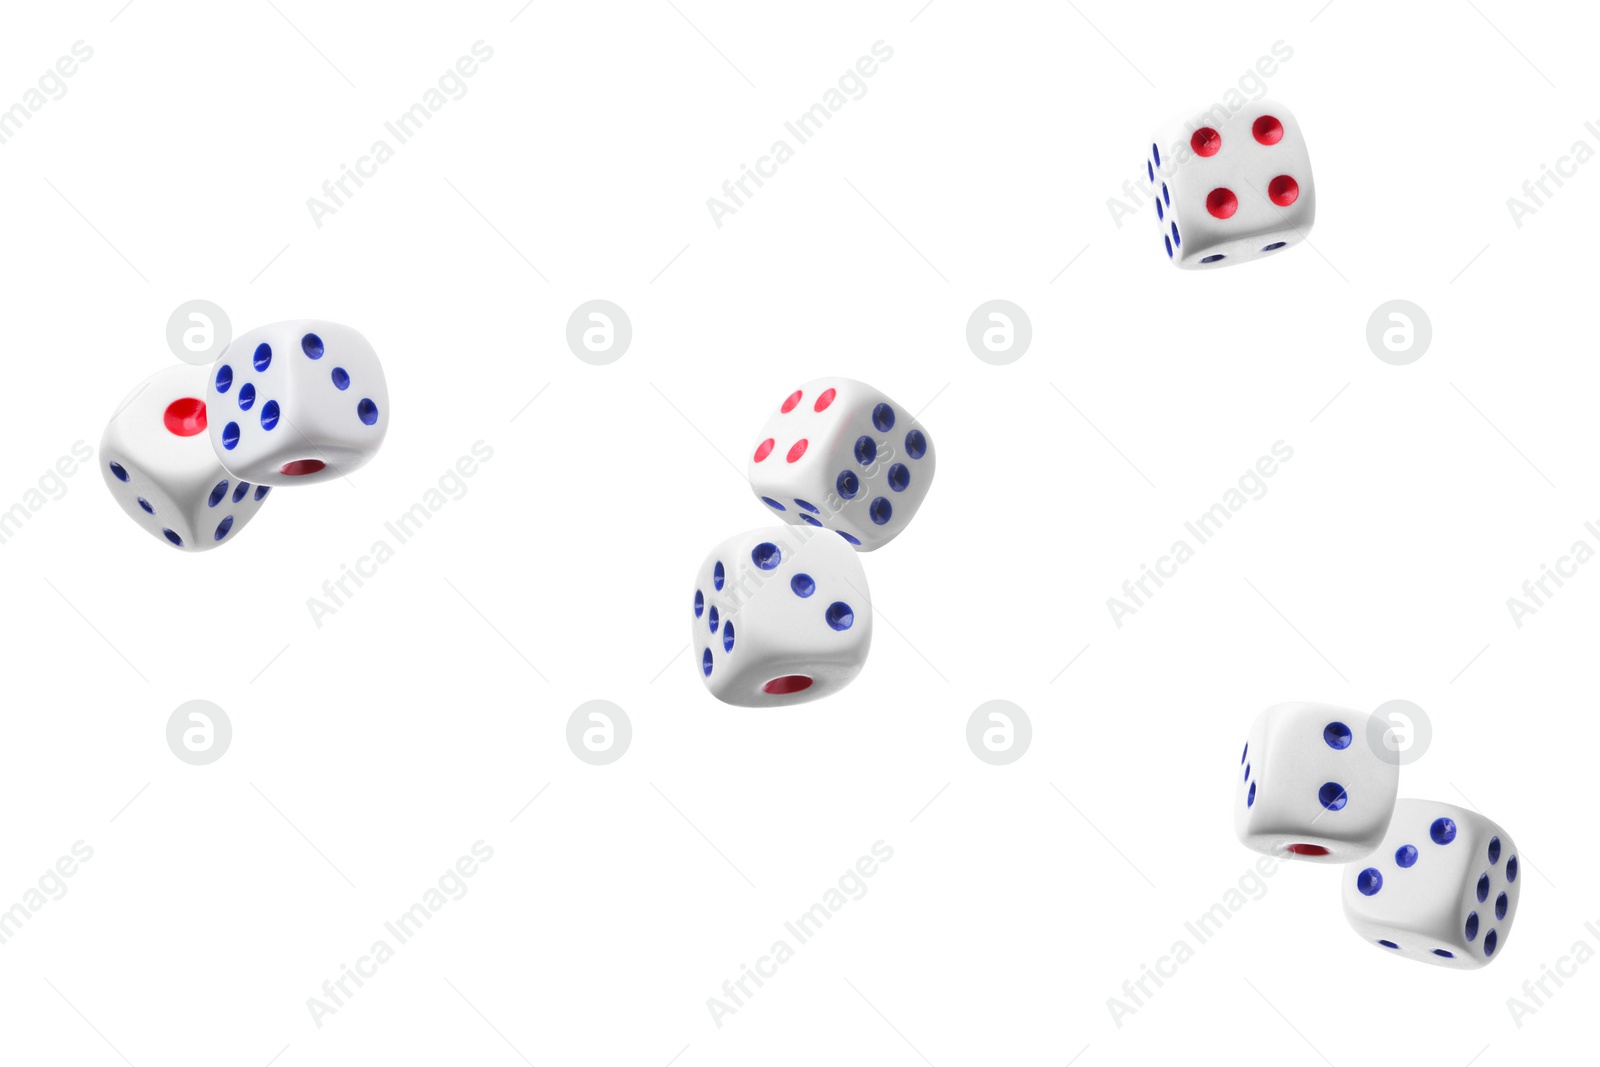 Image of Seven dice in air on white background